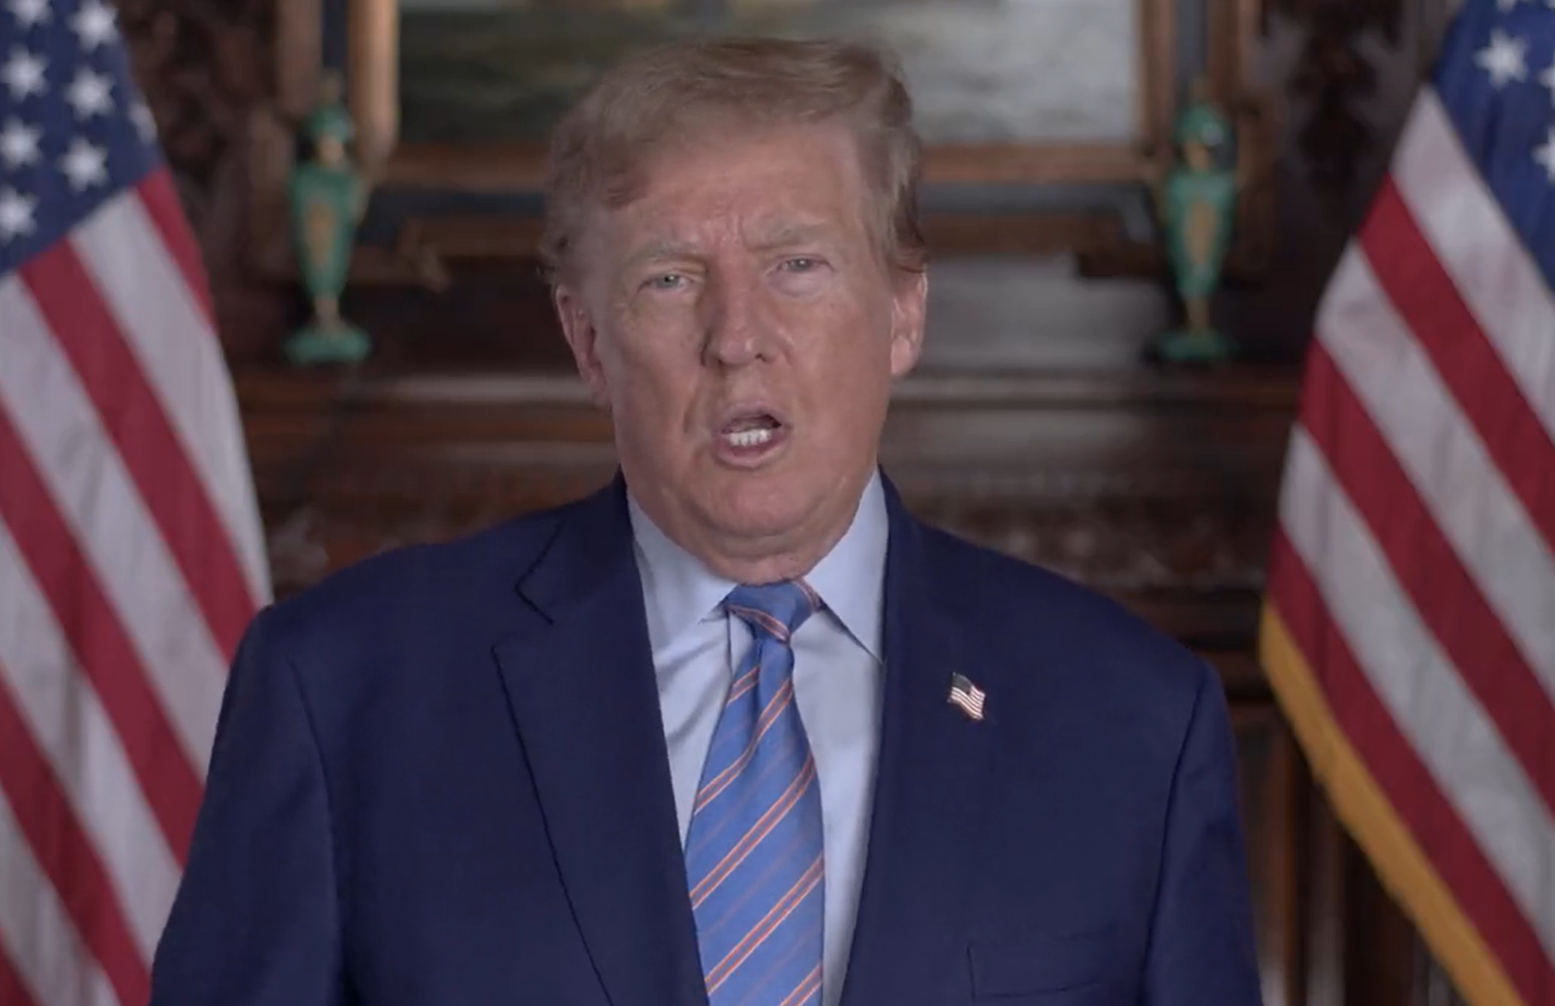 Trump Lashes Out At ‘The Atlantic’ After Brutal Article Details His Recent Rhetoric: ‘Frighteningly Clear About What He Wants’ (mediaite.com)